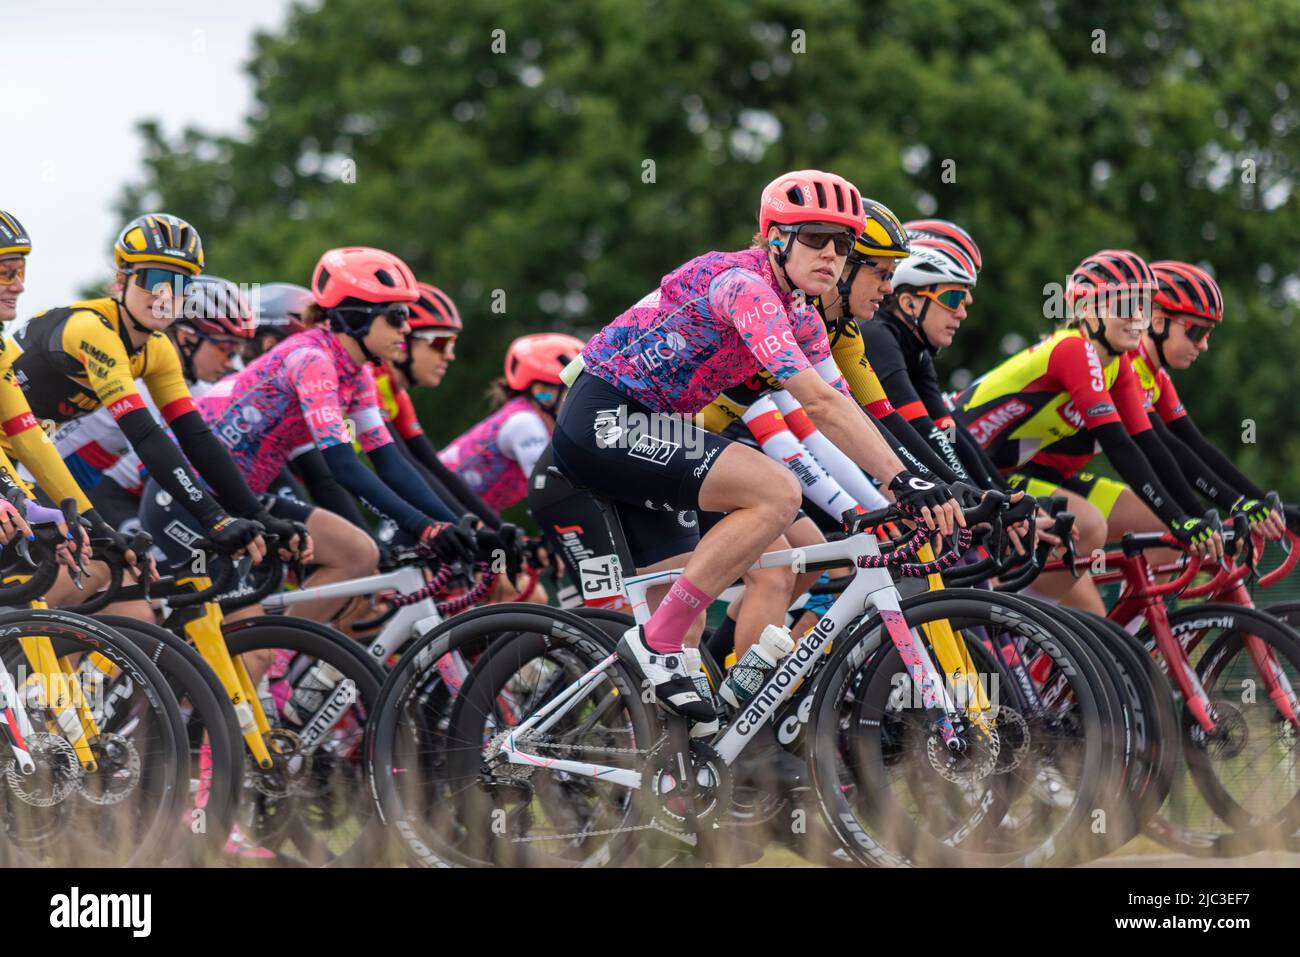 Cyclists at Colchester Sports Park racing in the UCI Women’s Tour cycle race Stage 1 heading out into Essex countryside. Tanja Erath (75) of EF Stock Photo